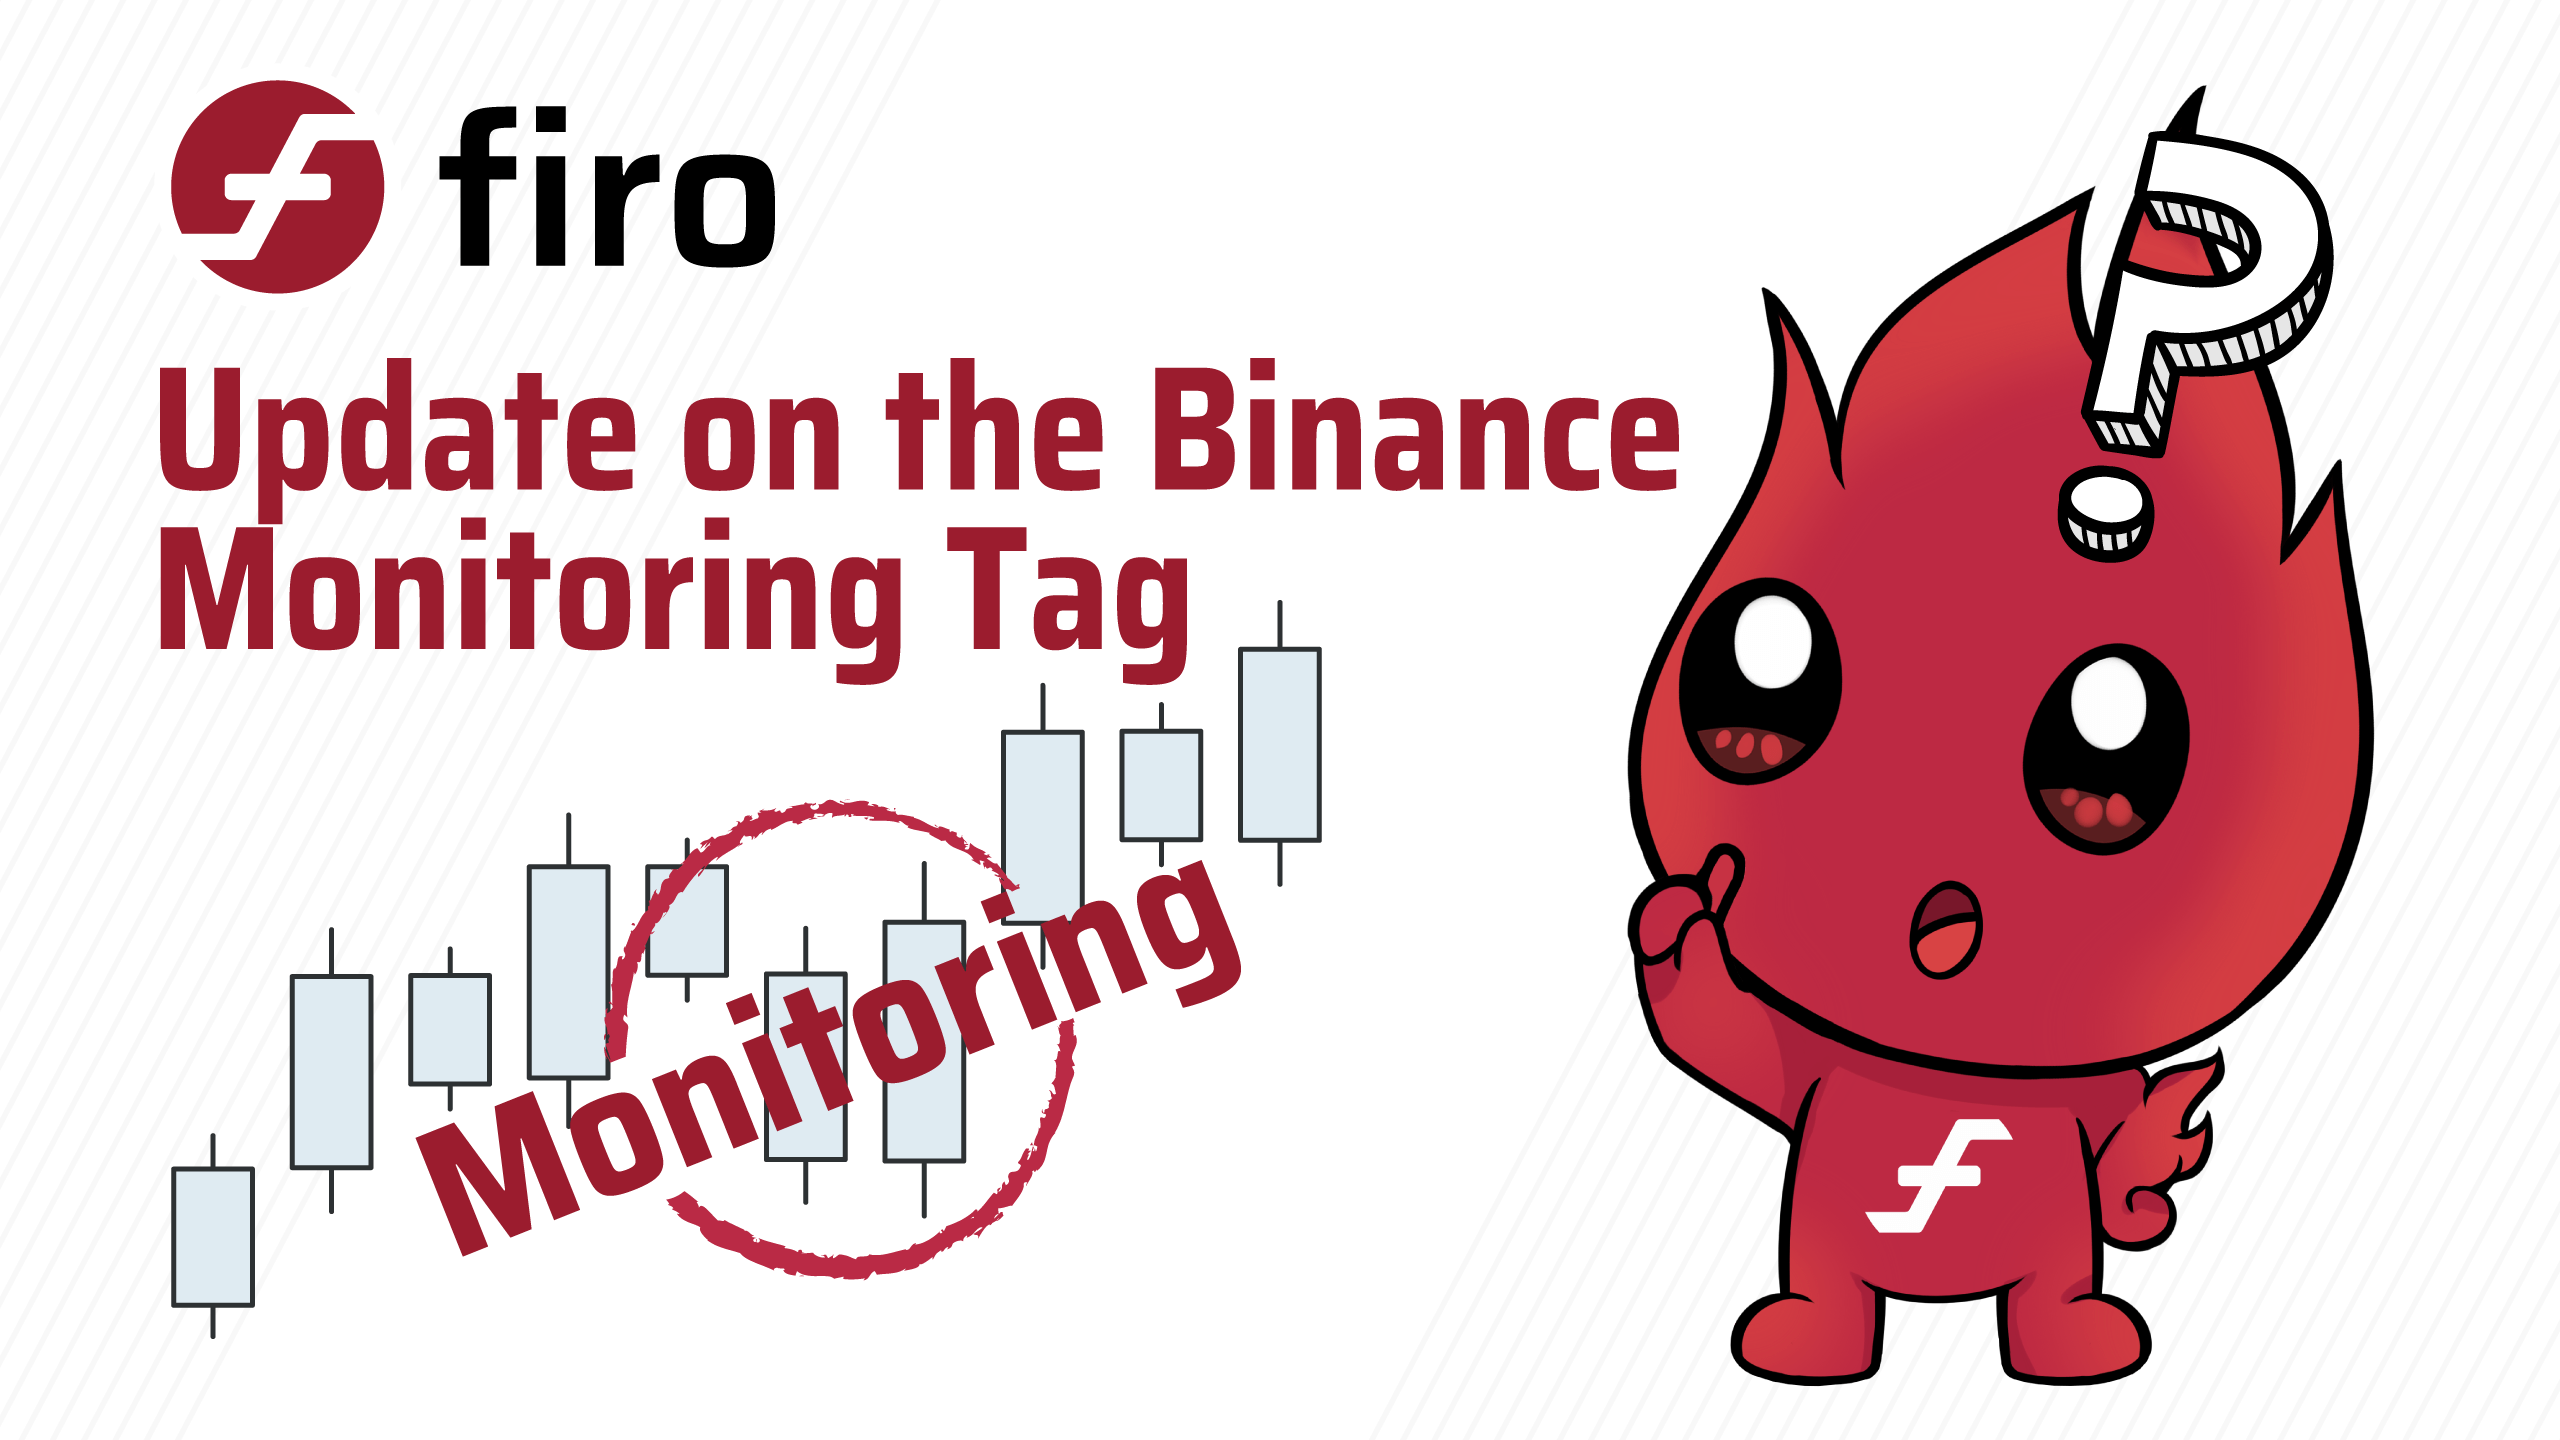 Update on Binance Monitoring Tag Issue